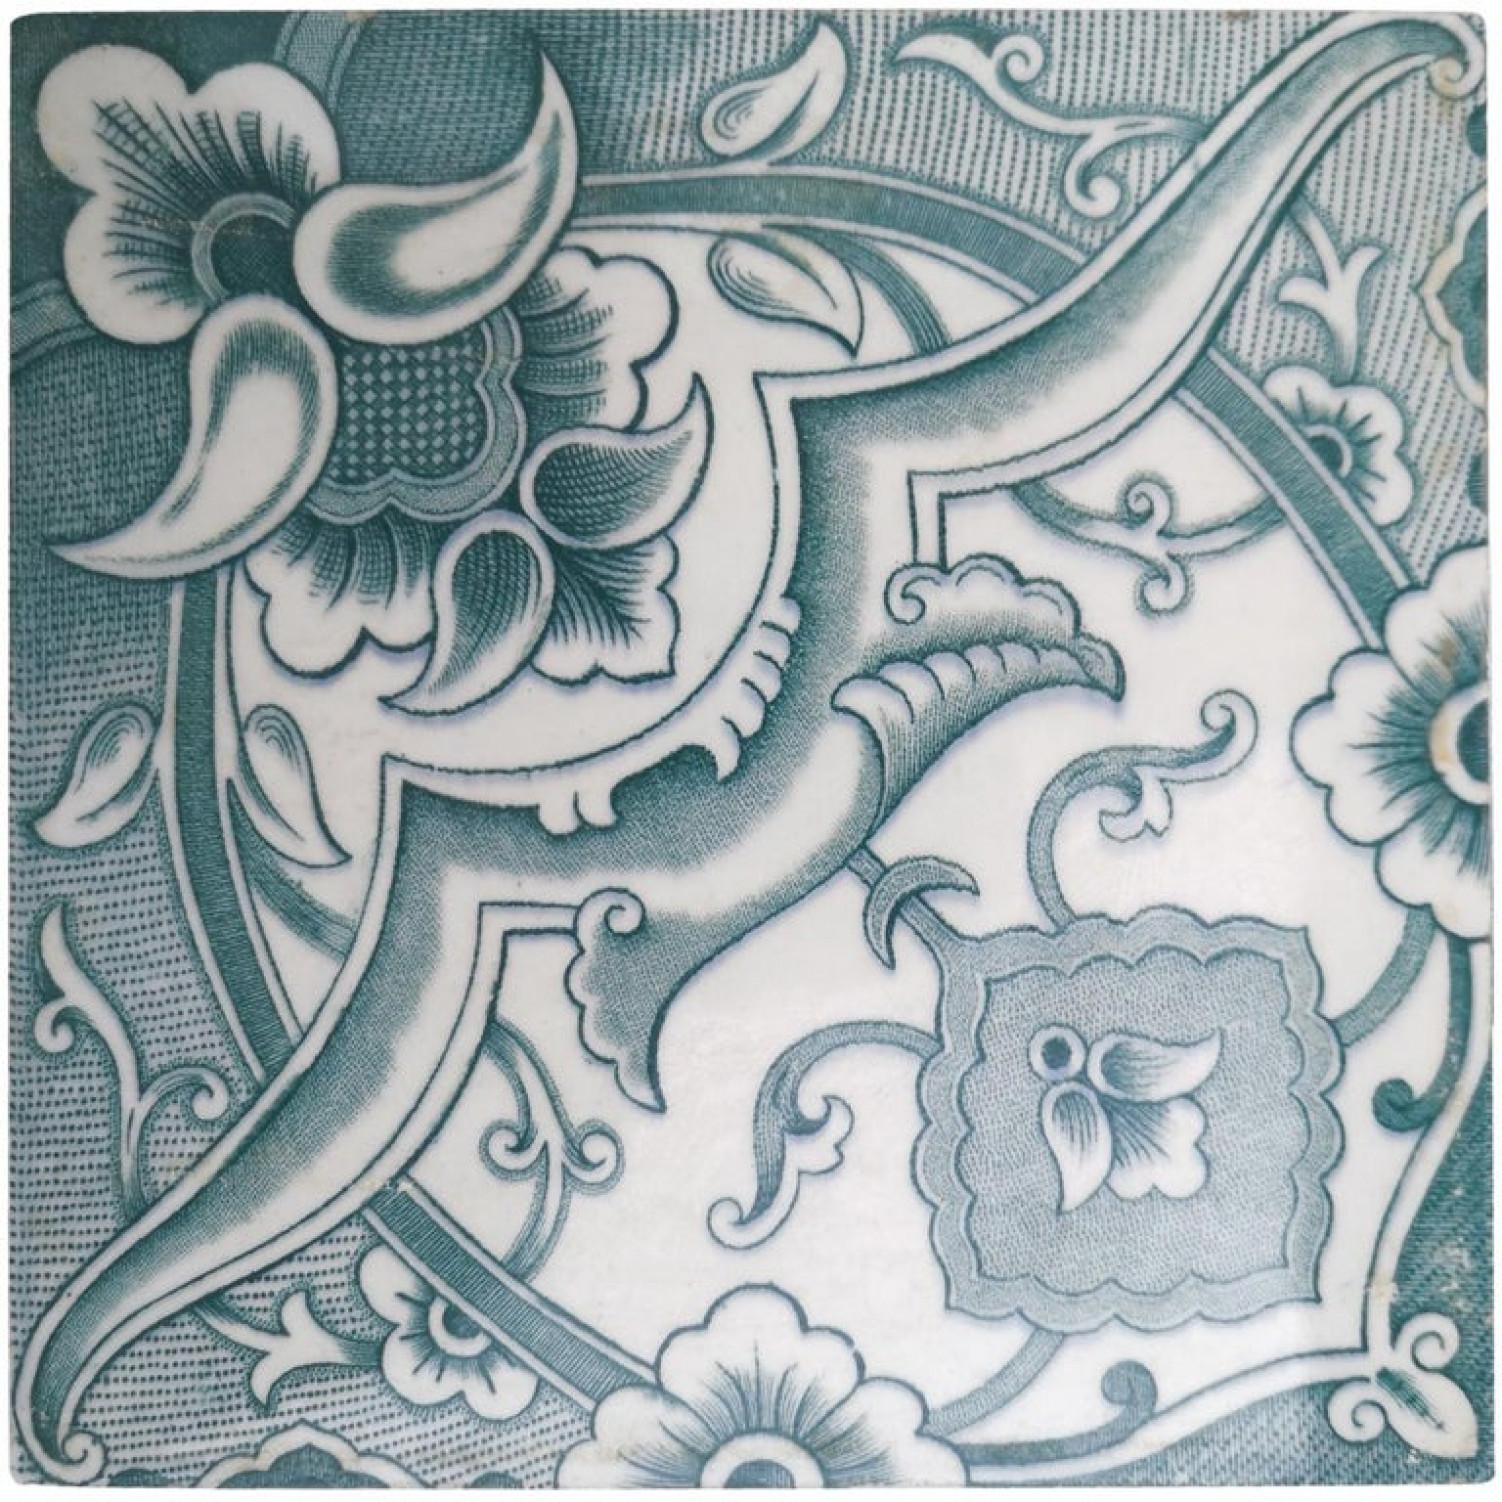 1 of the 150 glazed ceramic tiles tiles by Boch Freres, la Louvière, circa 1920's . Beautiful original antique dark green and off-white tiles with a wonderful rich pattern.

The dimensions per tile are: 5.9 inch (15.2 cm) width x 5.9 inch (15.2 cm)